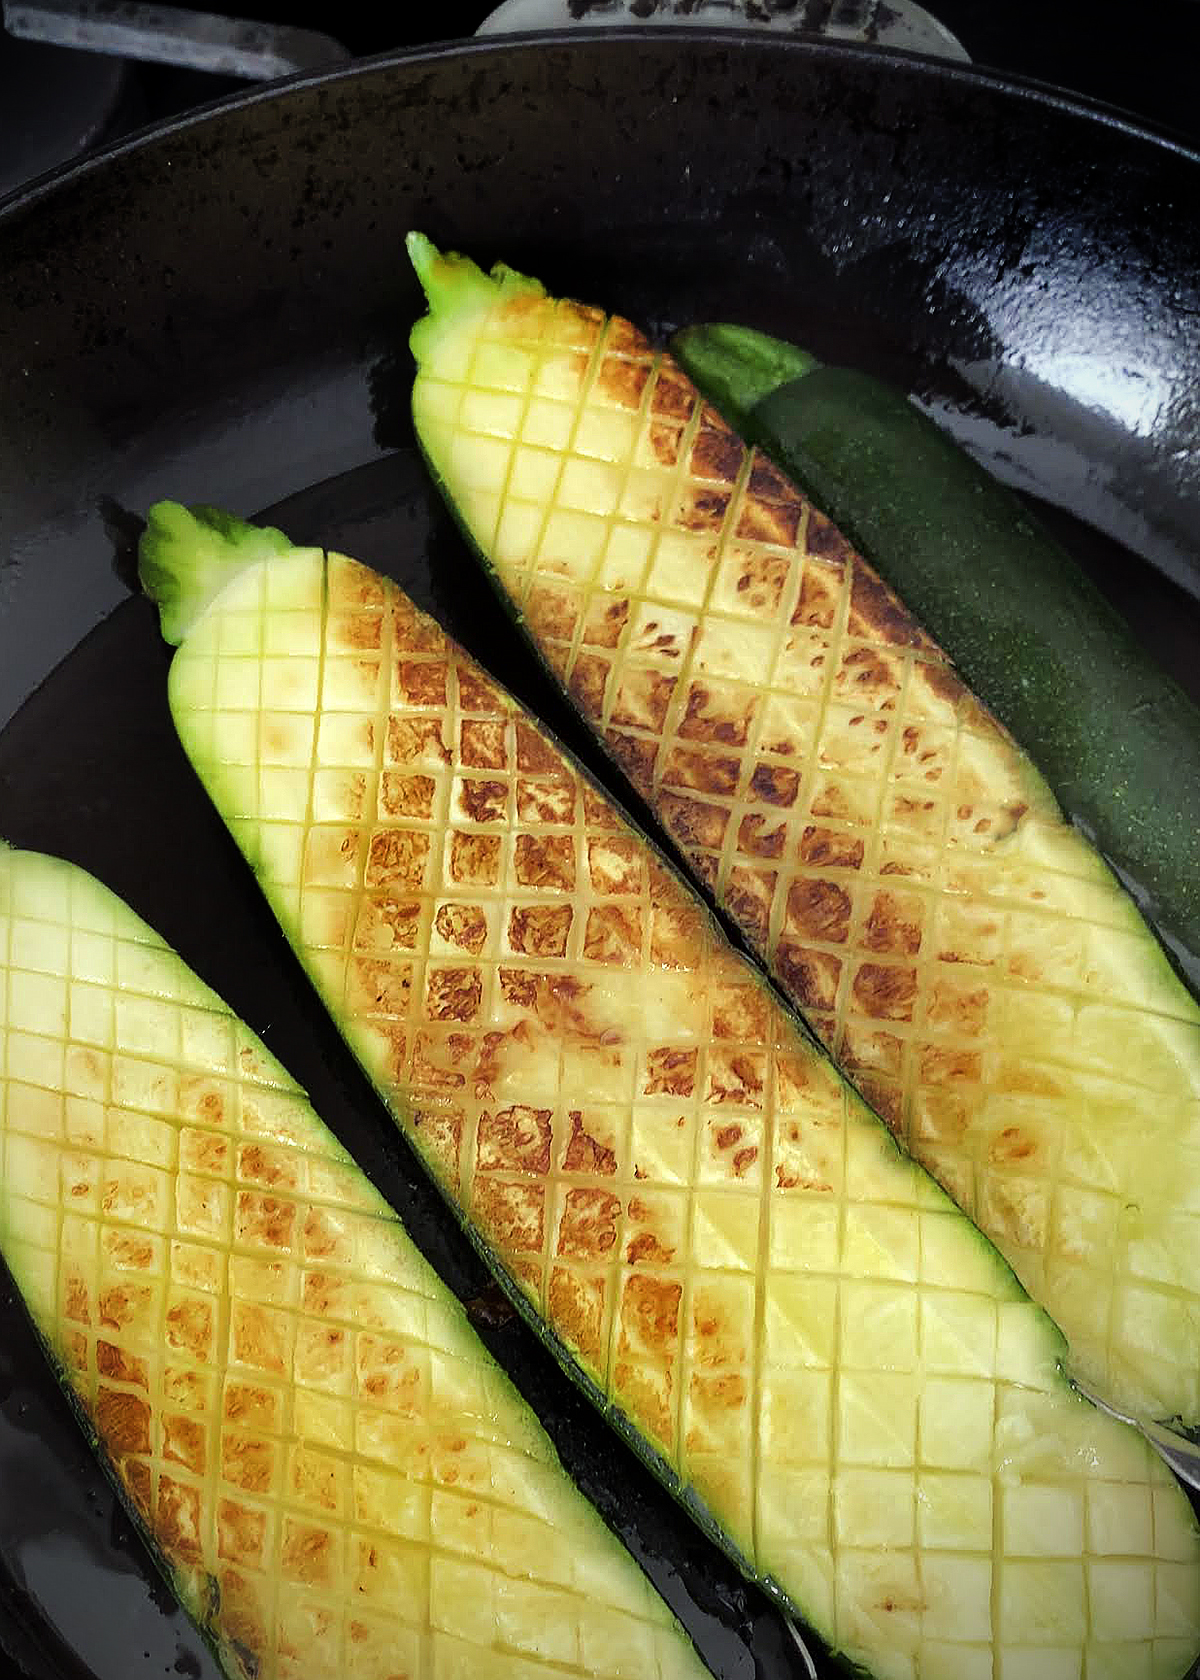 oven roasted zucchini sliced lengthwise, and cut thomas keller style, in cast iron skillet